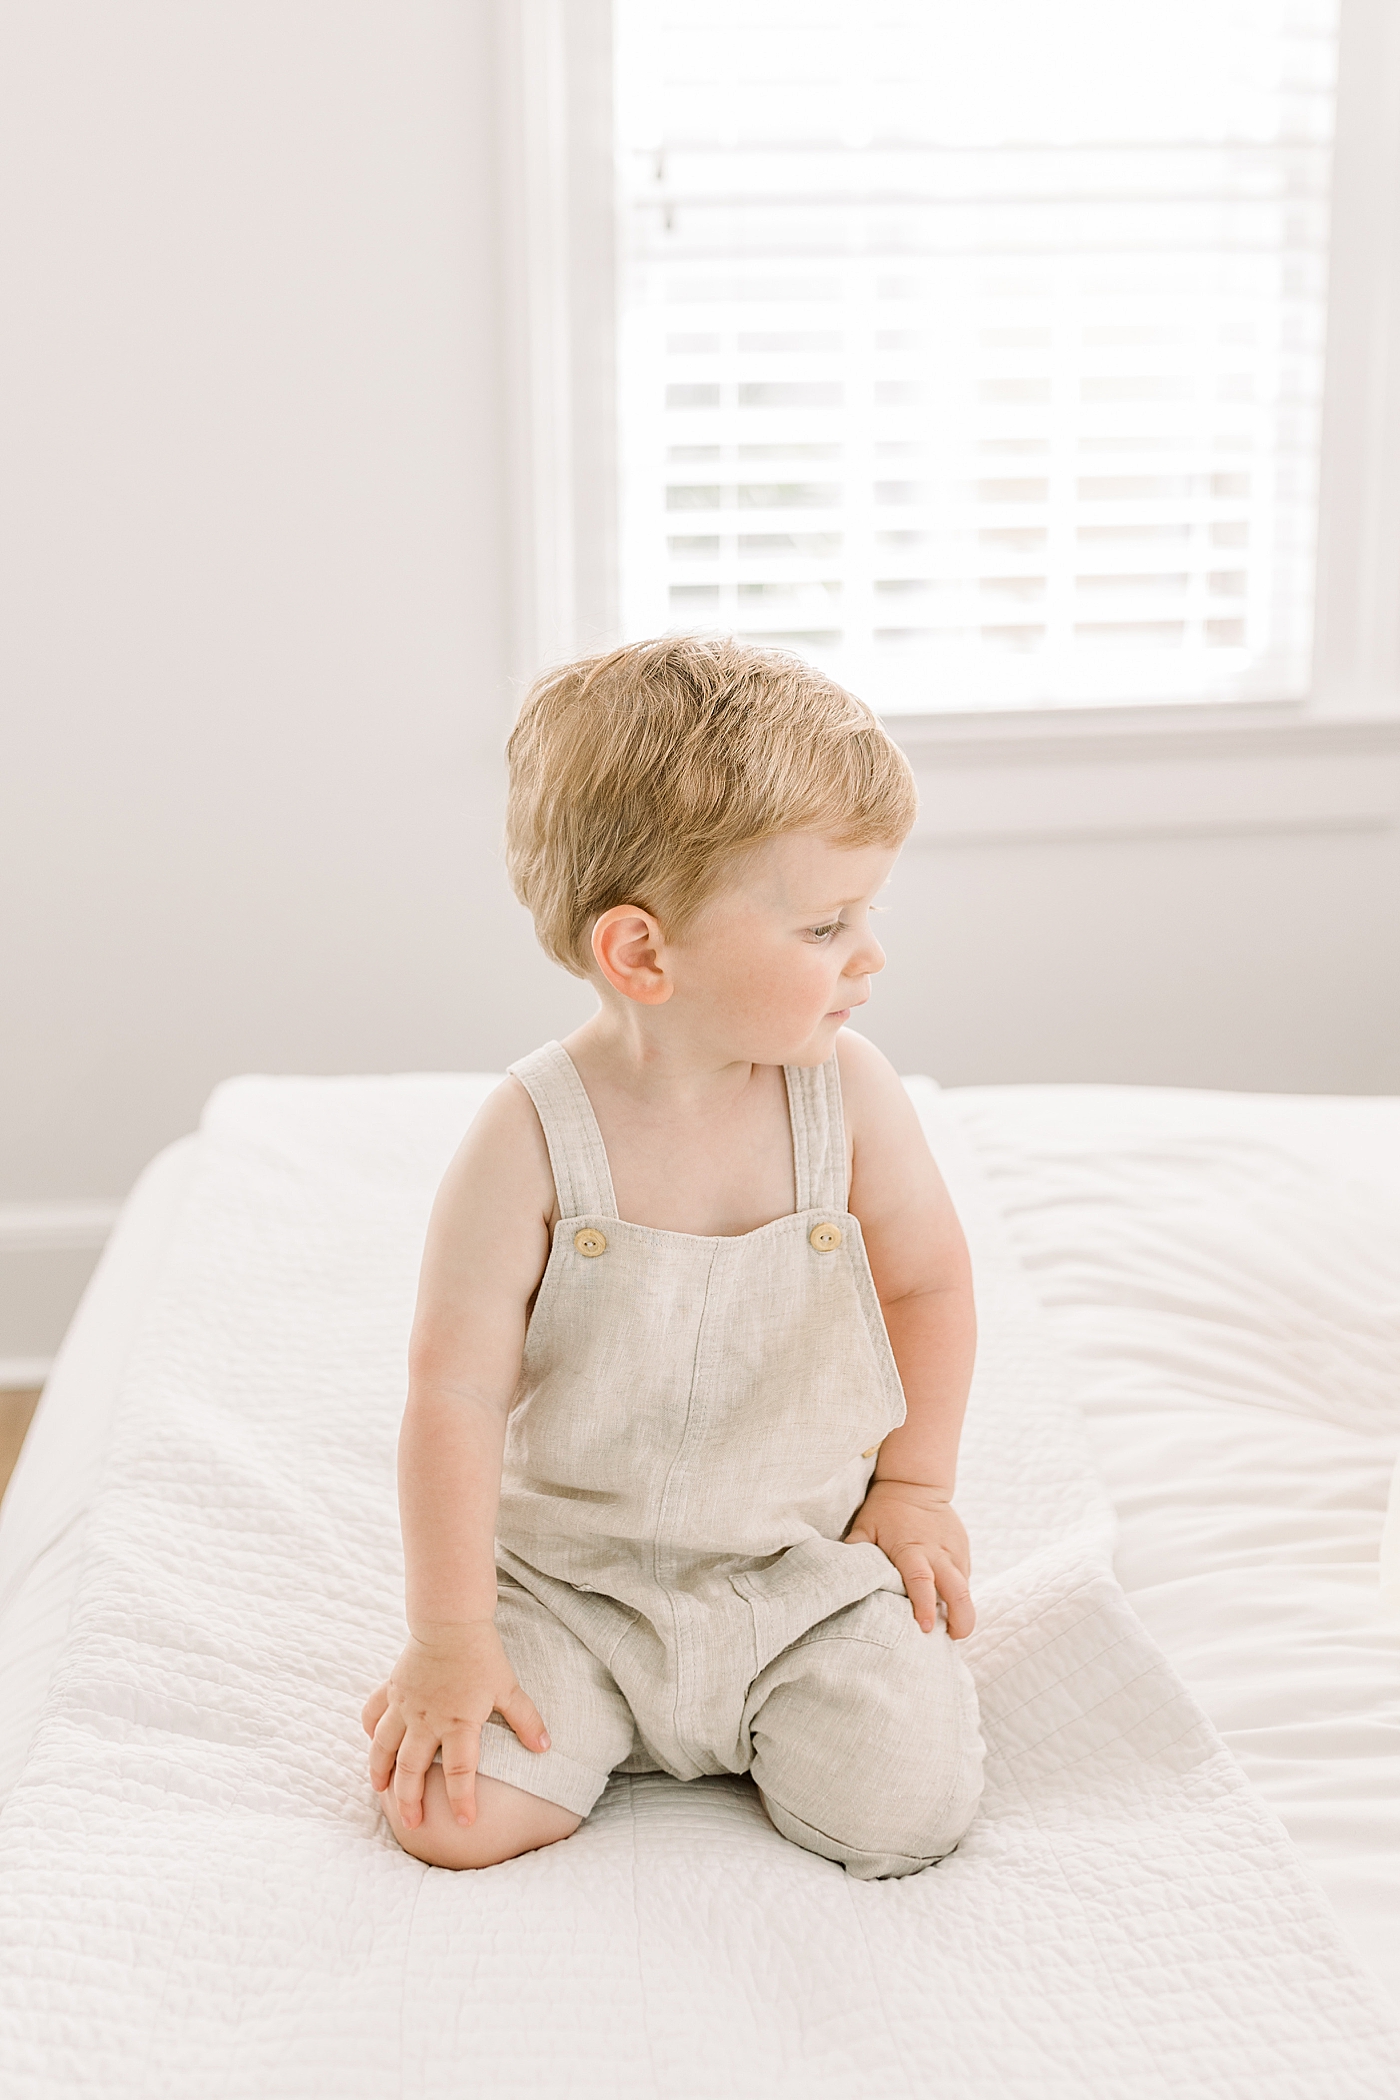 Little boy kneeling and looking sideways in a softly lit, white room | Image by Caitlyn Motycka 